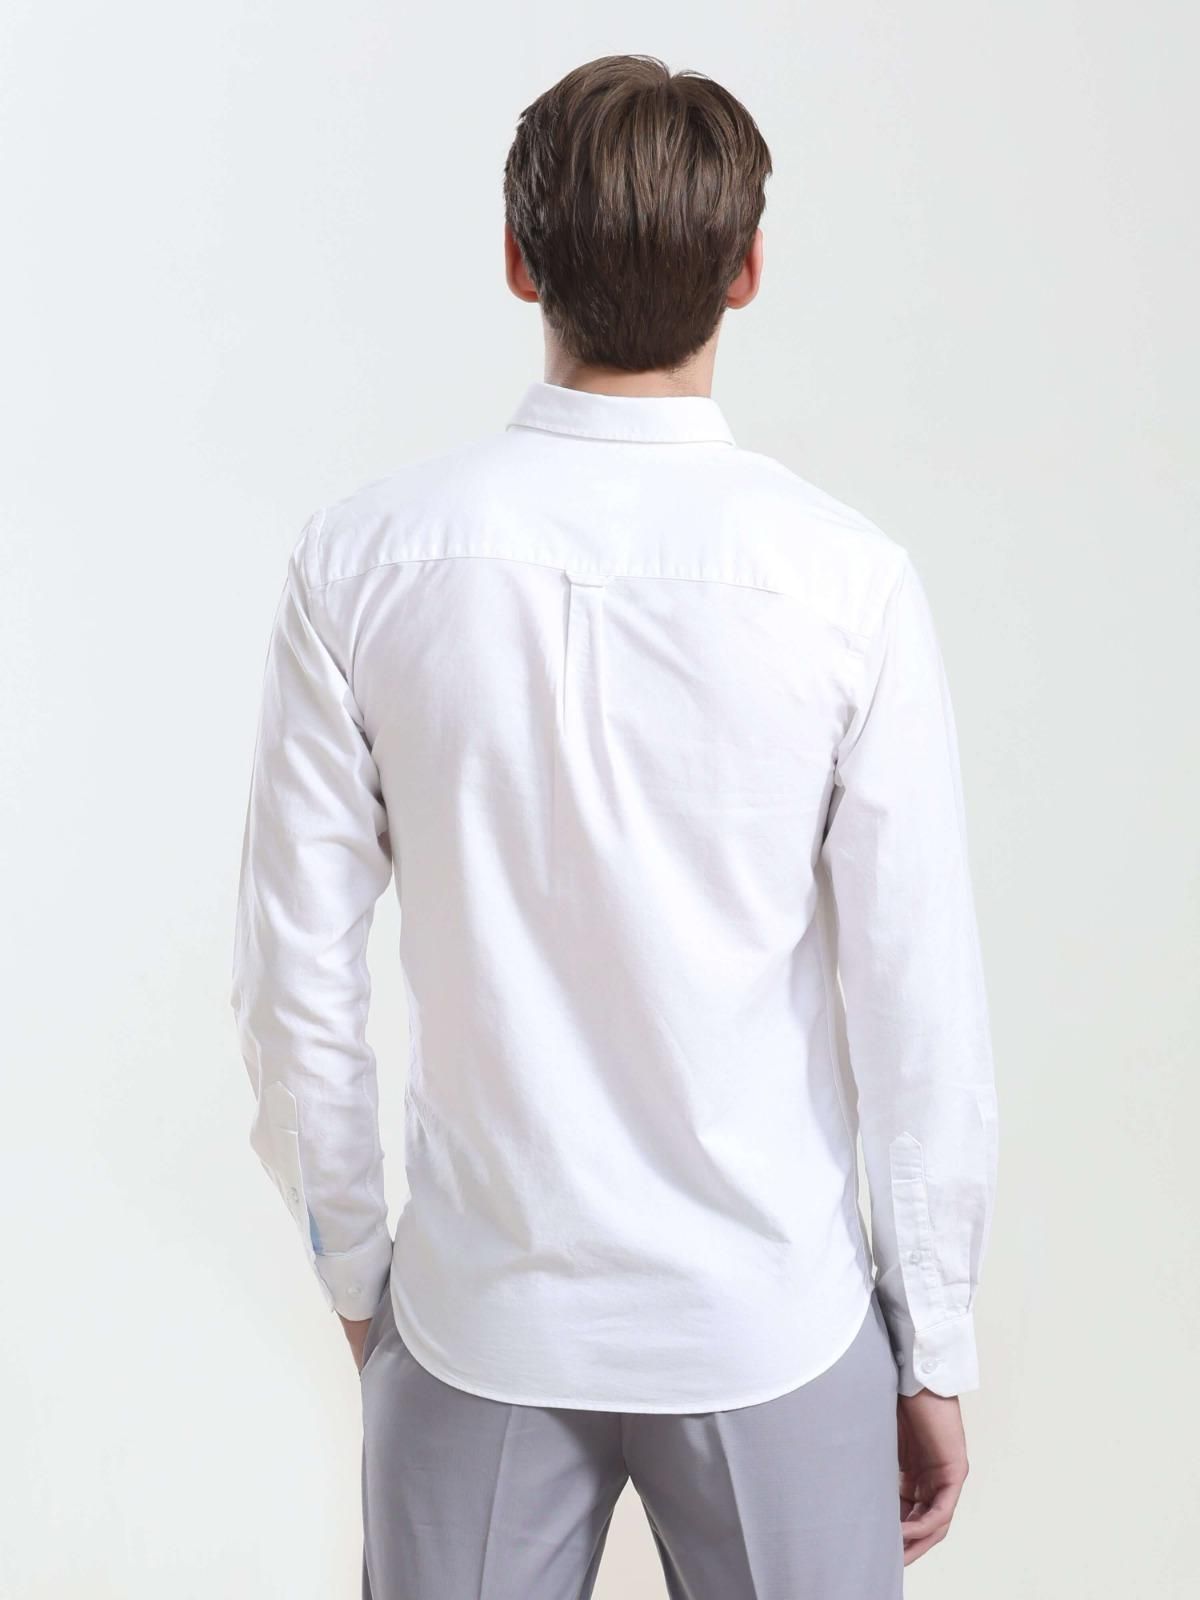 Men's Luxury White Cotton Shirt with Anti-Stain and Anti-Odor Features